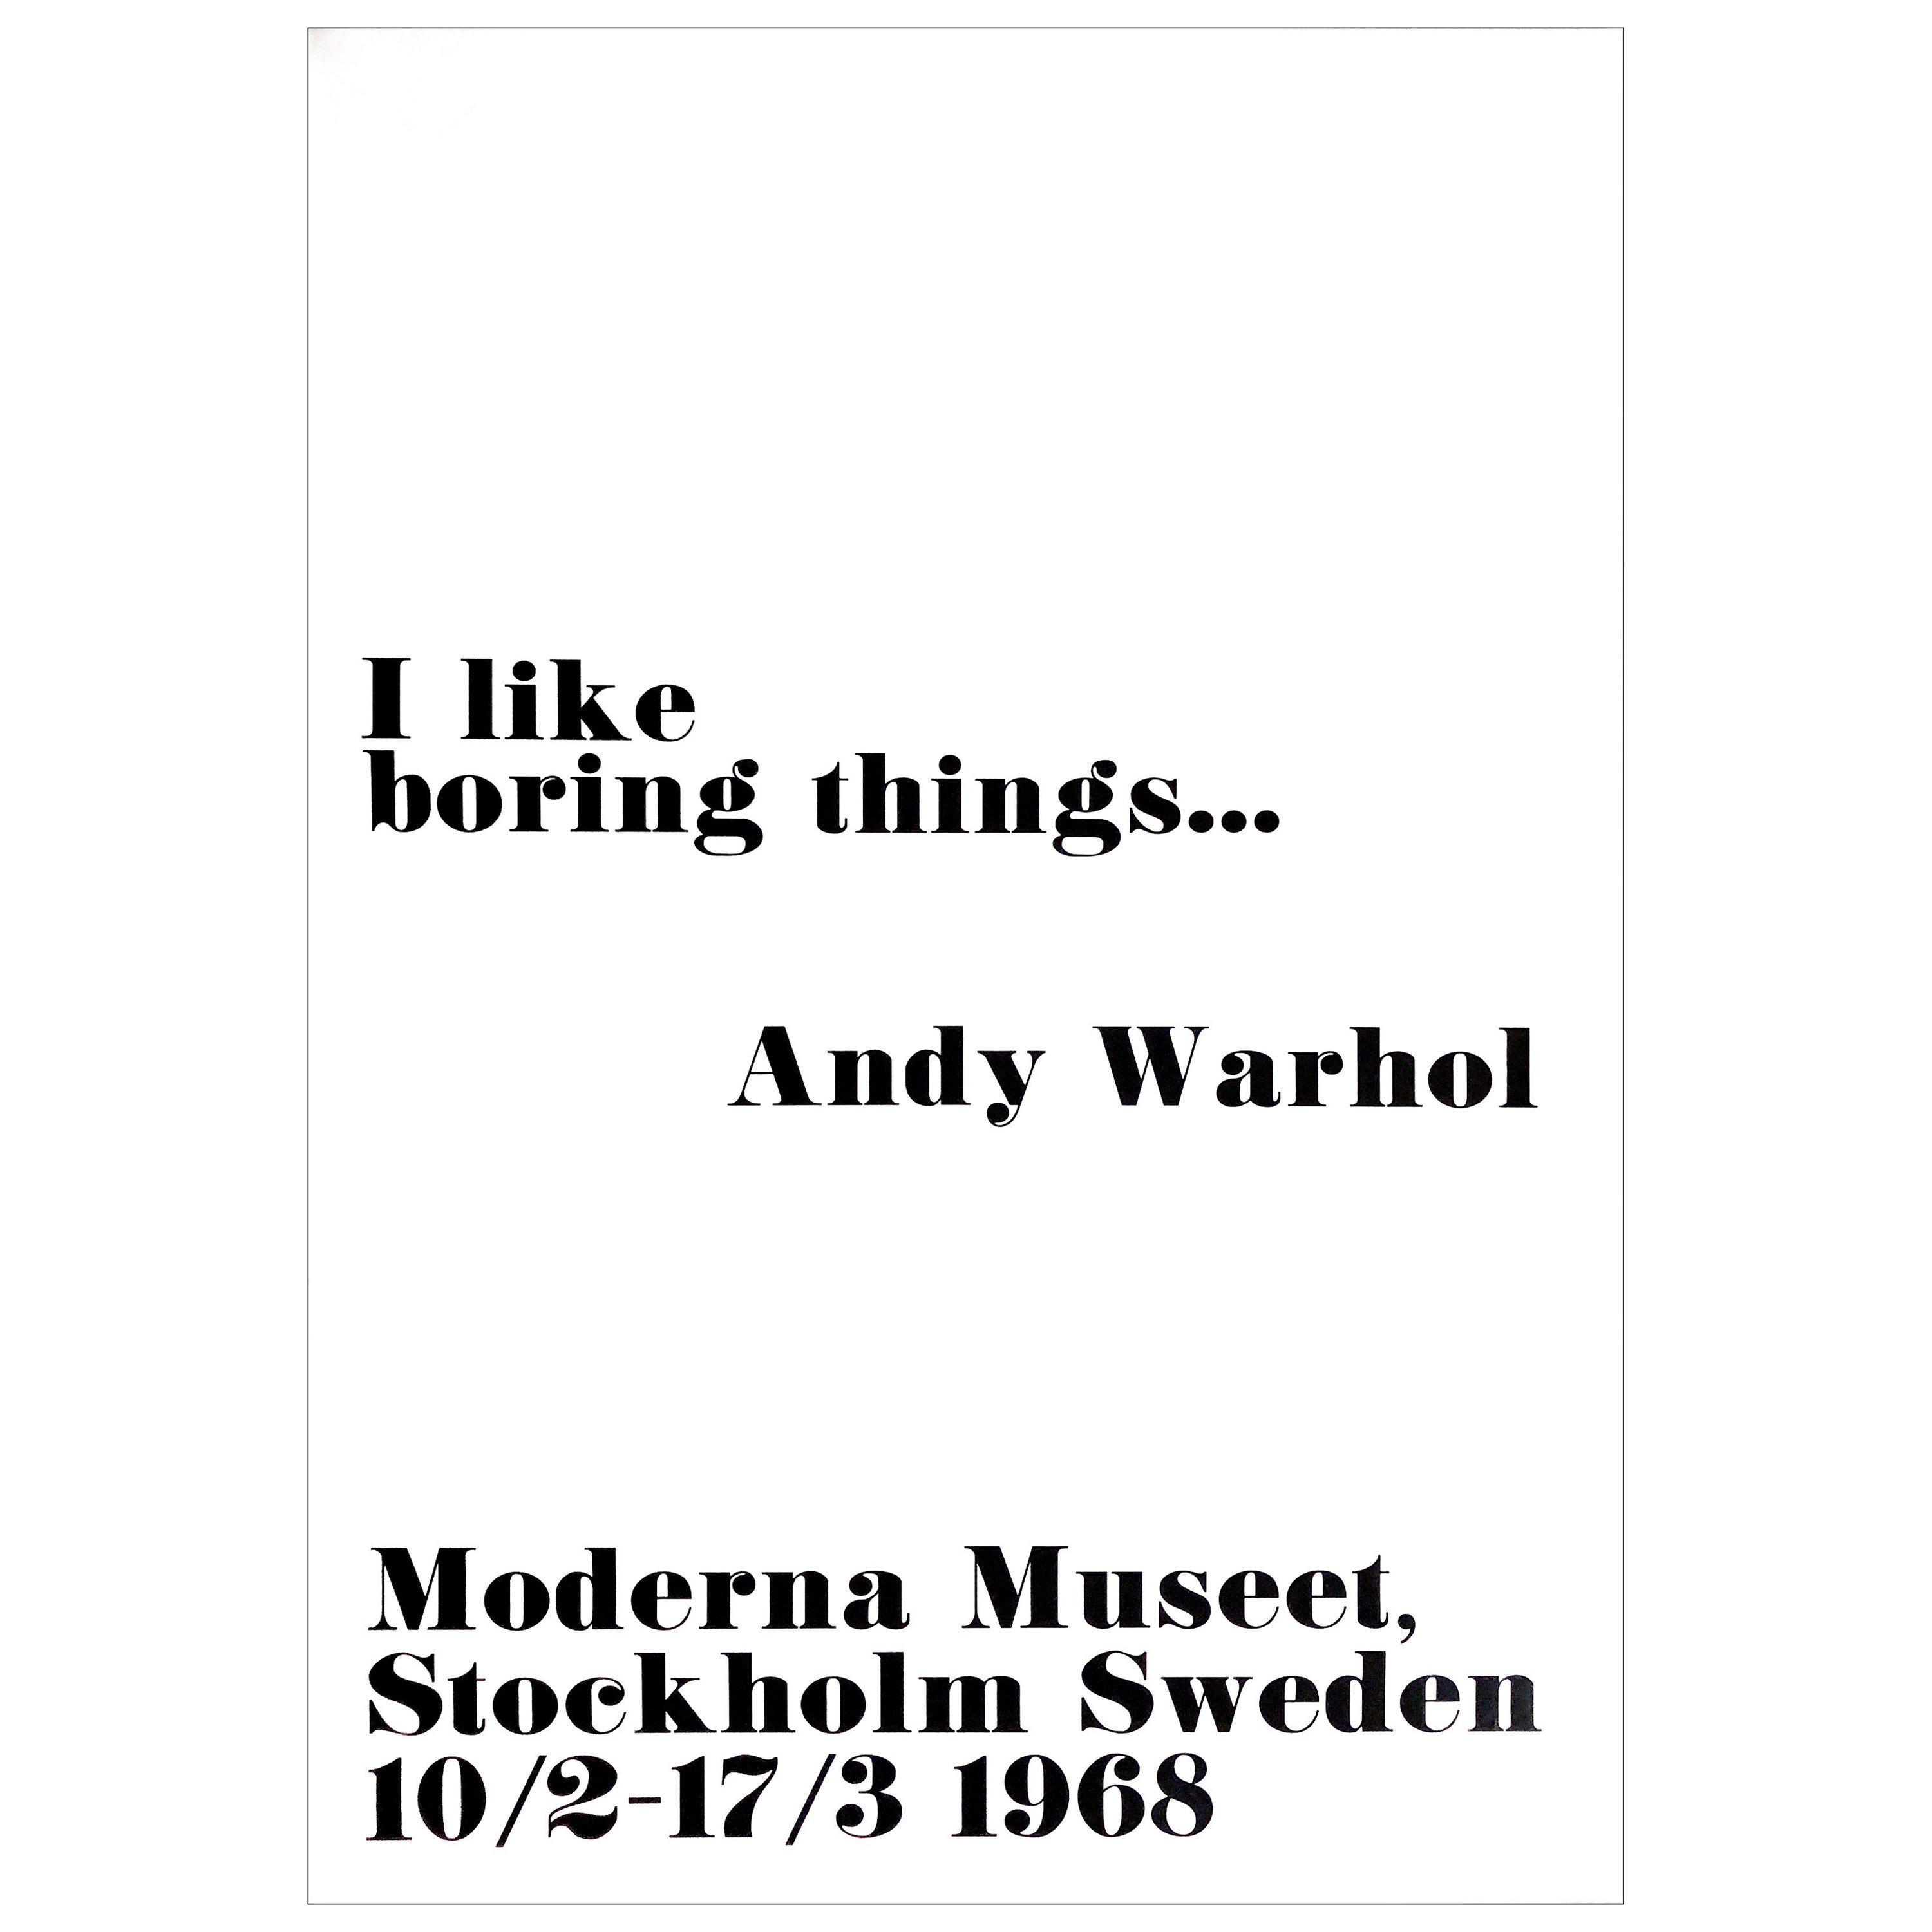 Affiche d'exposition originale « I Like Boring Things » d'Andy Warhol, 1968 